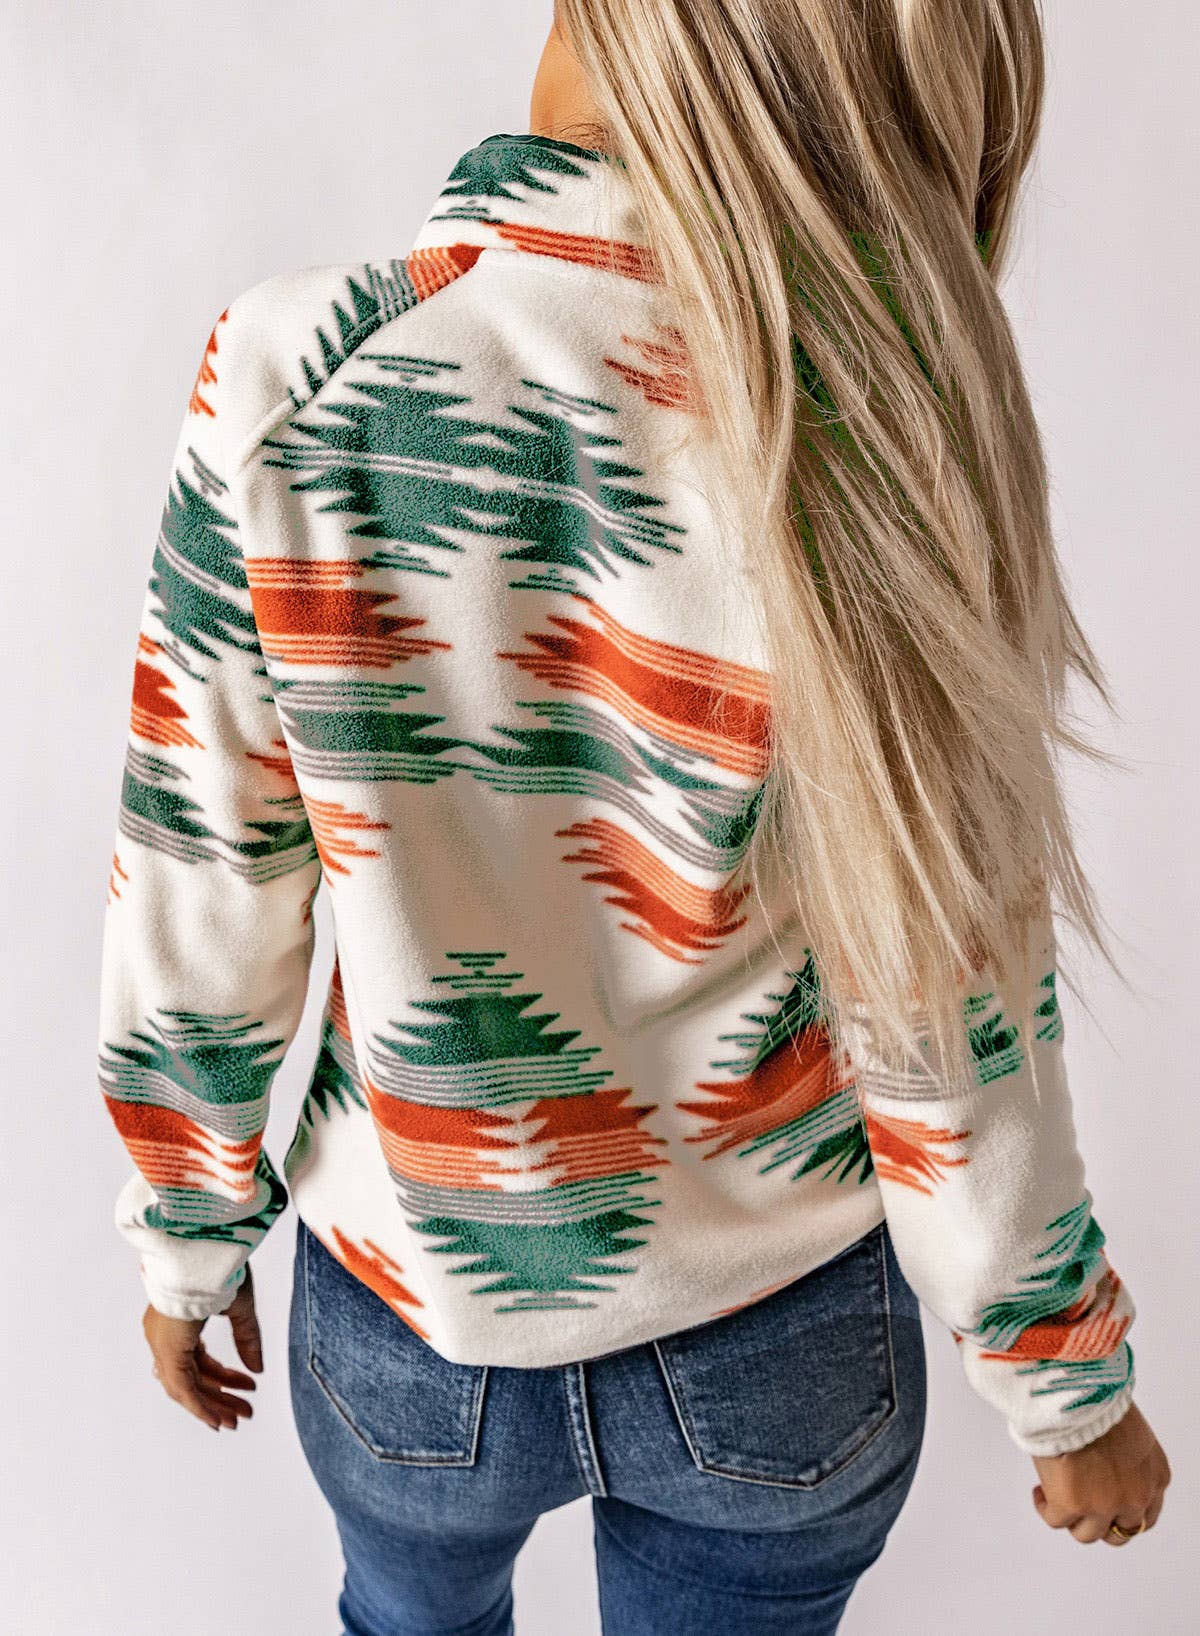 Rustic Charm: Snap Buttoned Fleece Jacket: S / Green